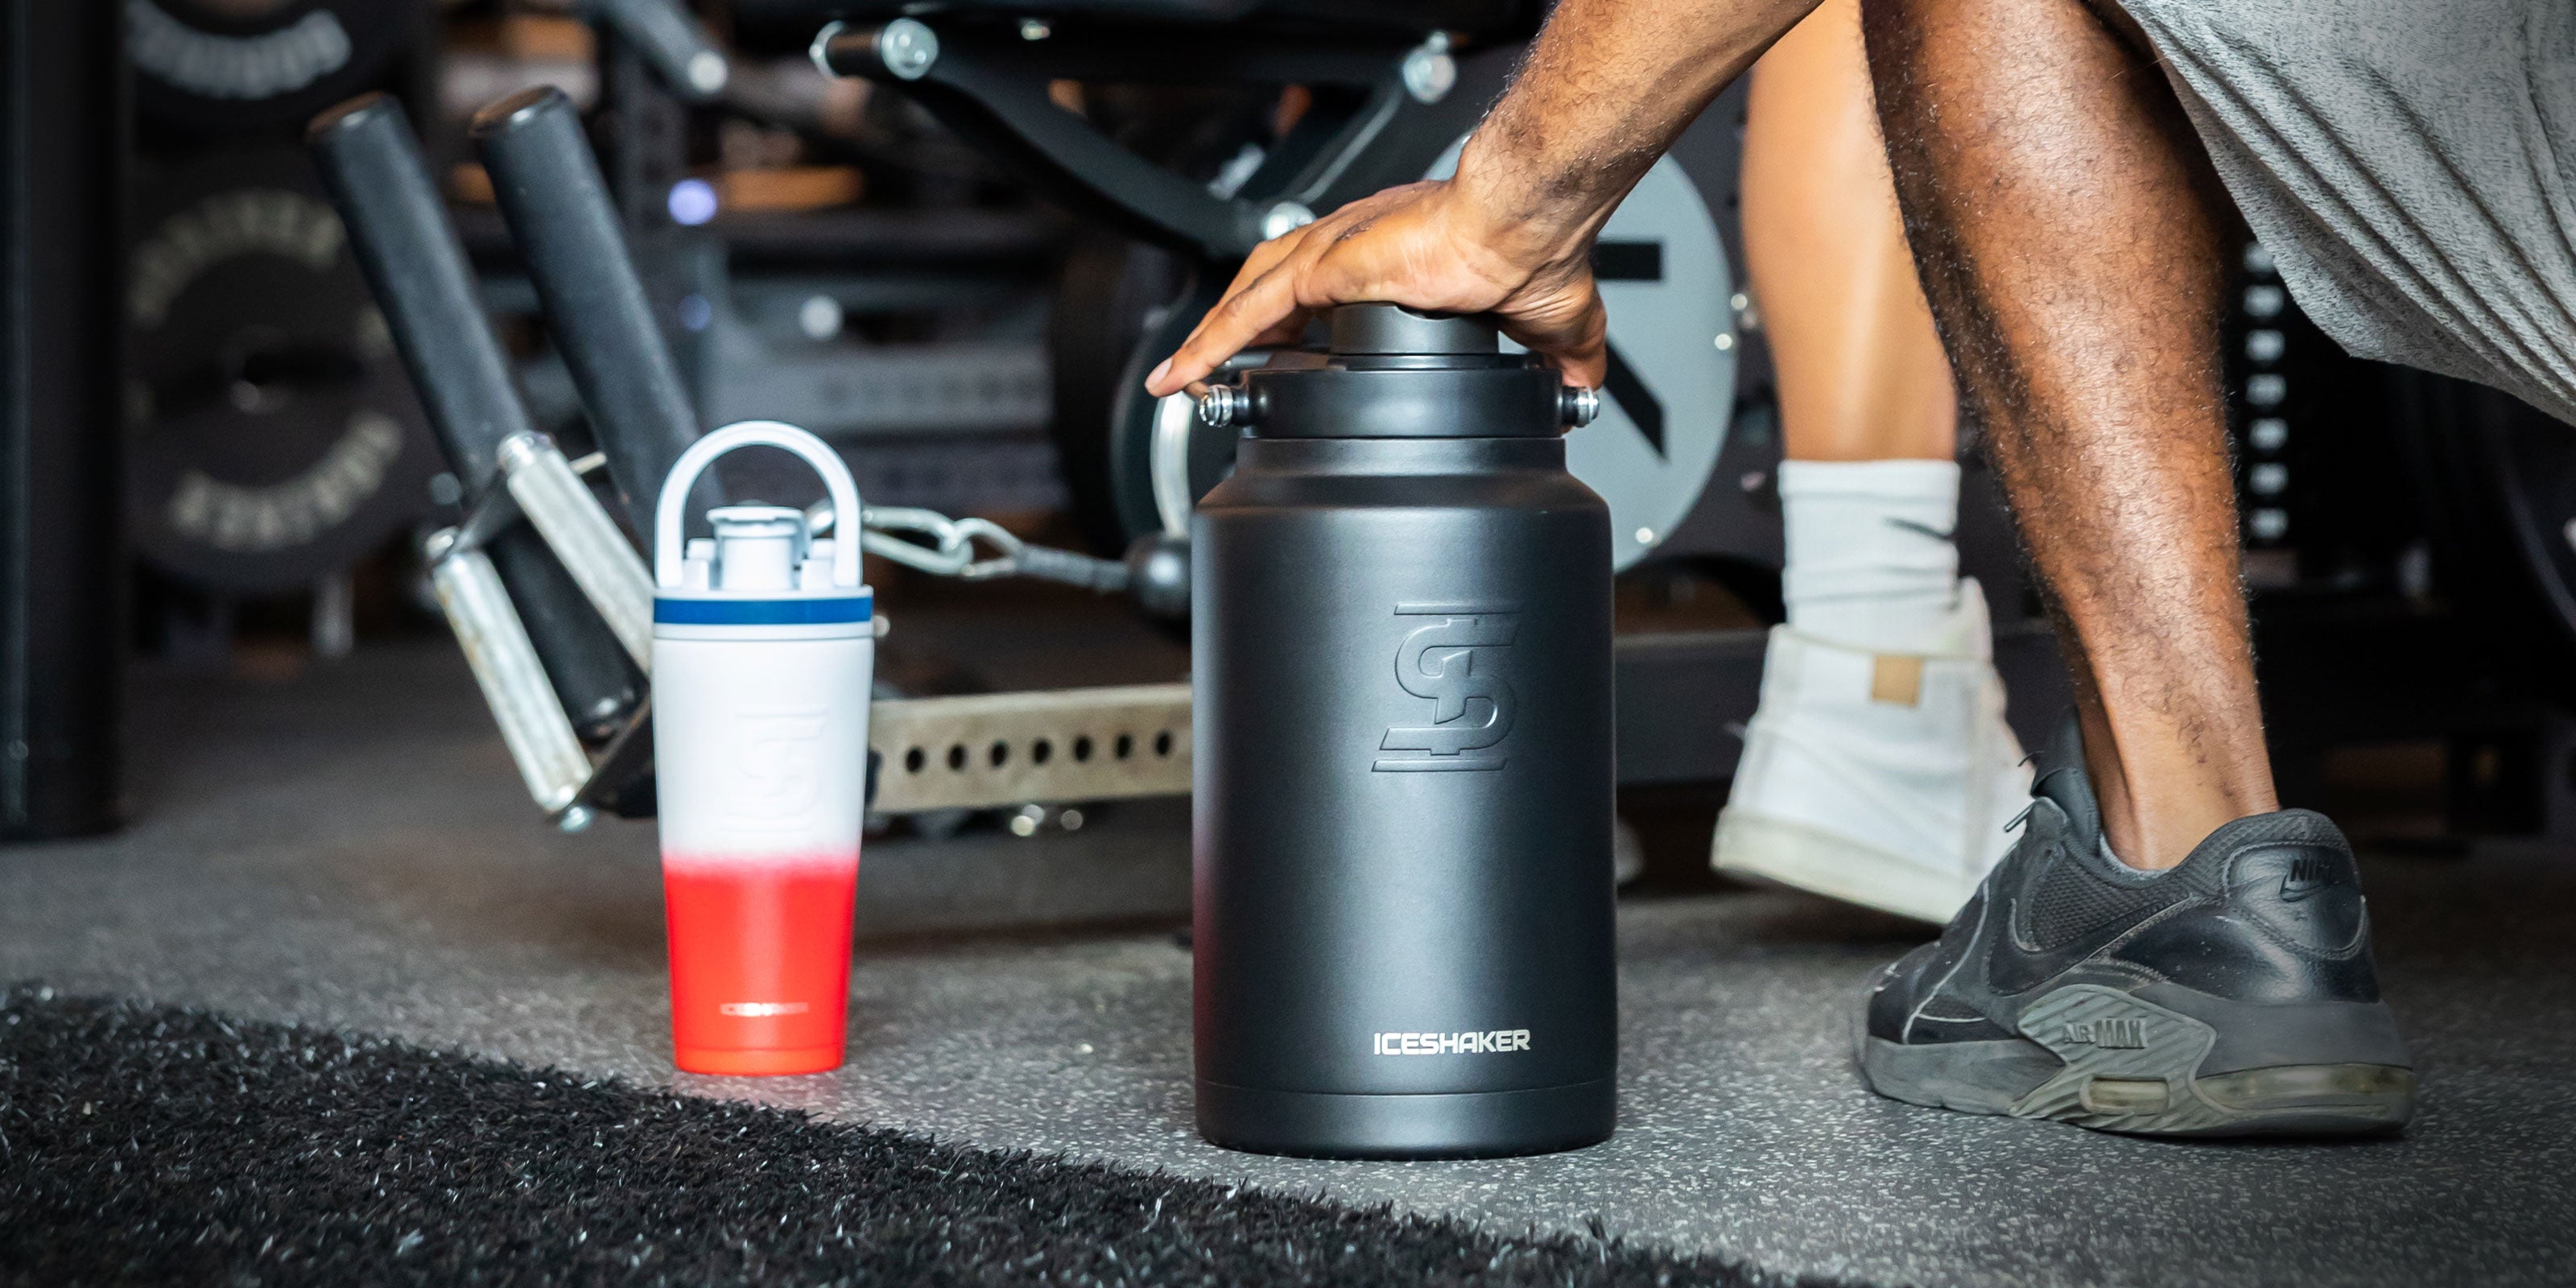 An image of a Black Ice Shaker One Gallon Jug and USA-colored 26oz Ice Shaker Bottle sitting on a gym floor as people workout in the background.